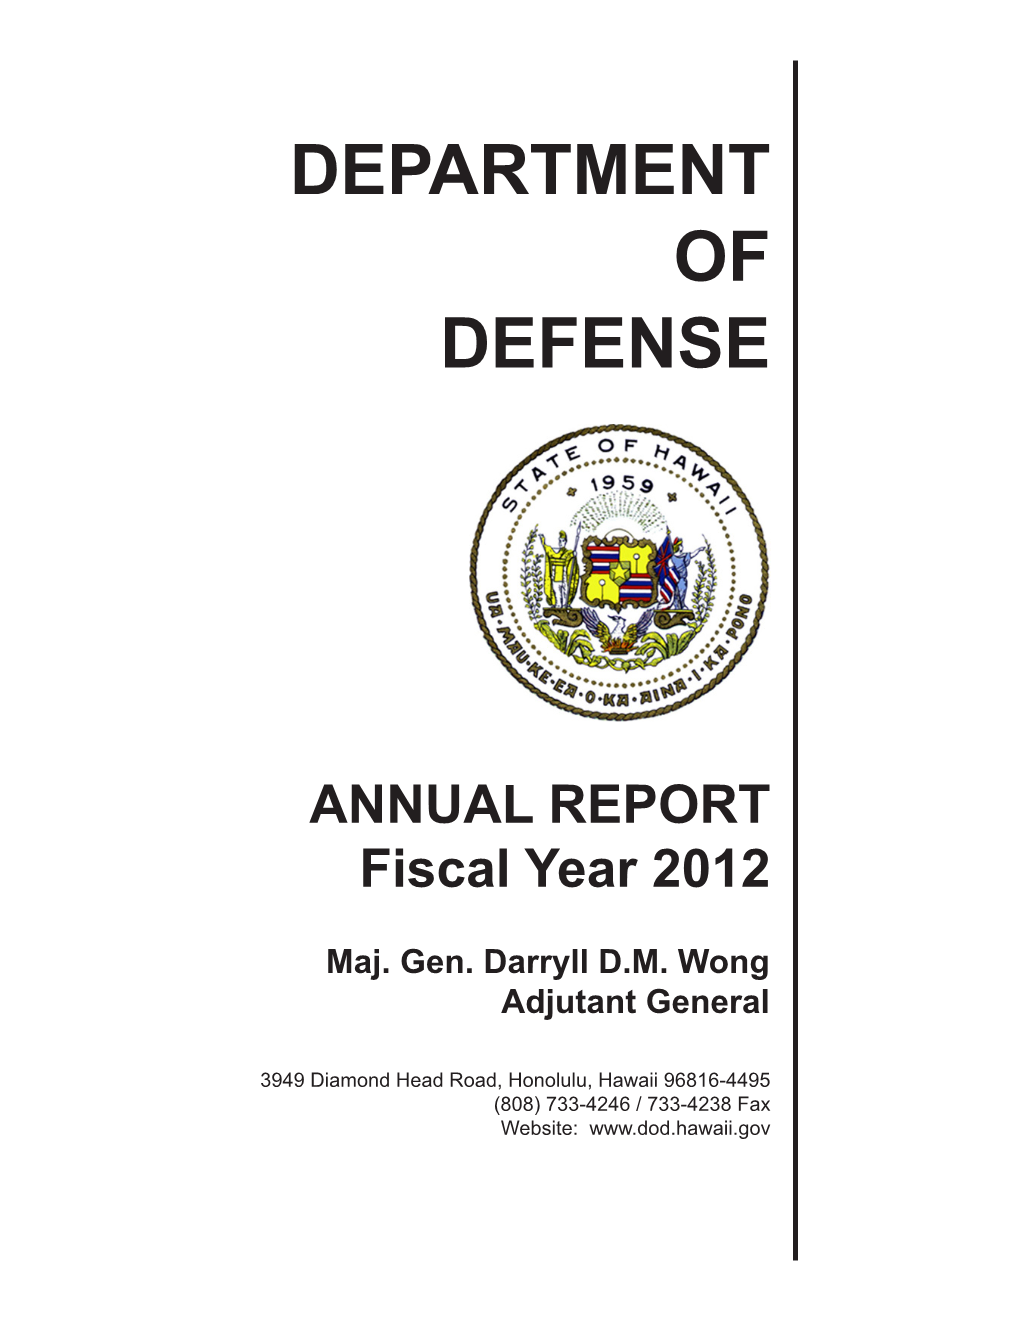 ANNUAL REPORT Fiscal Year 2012